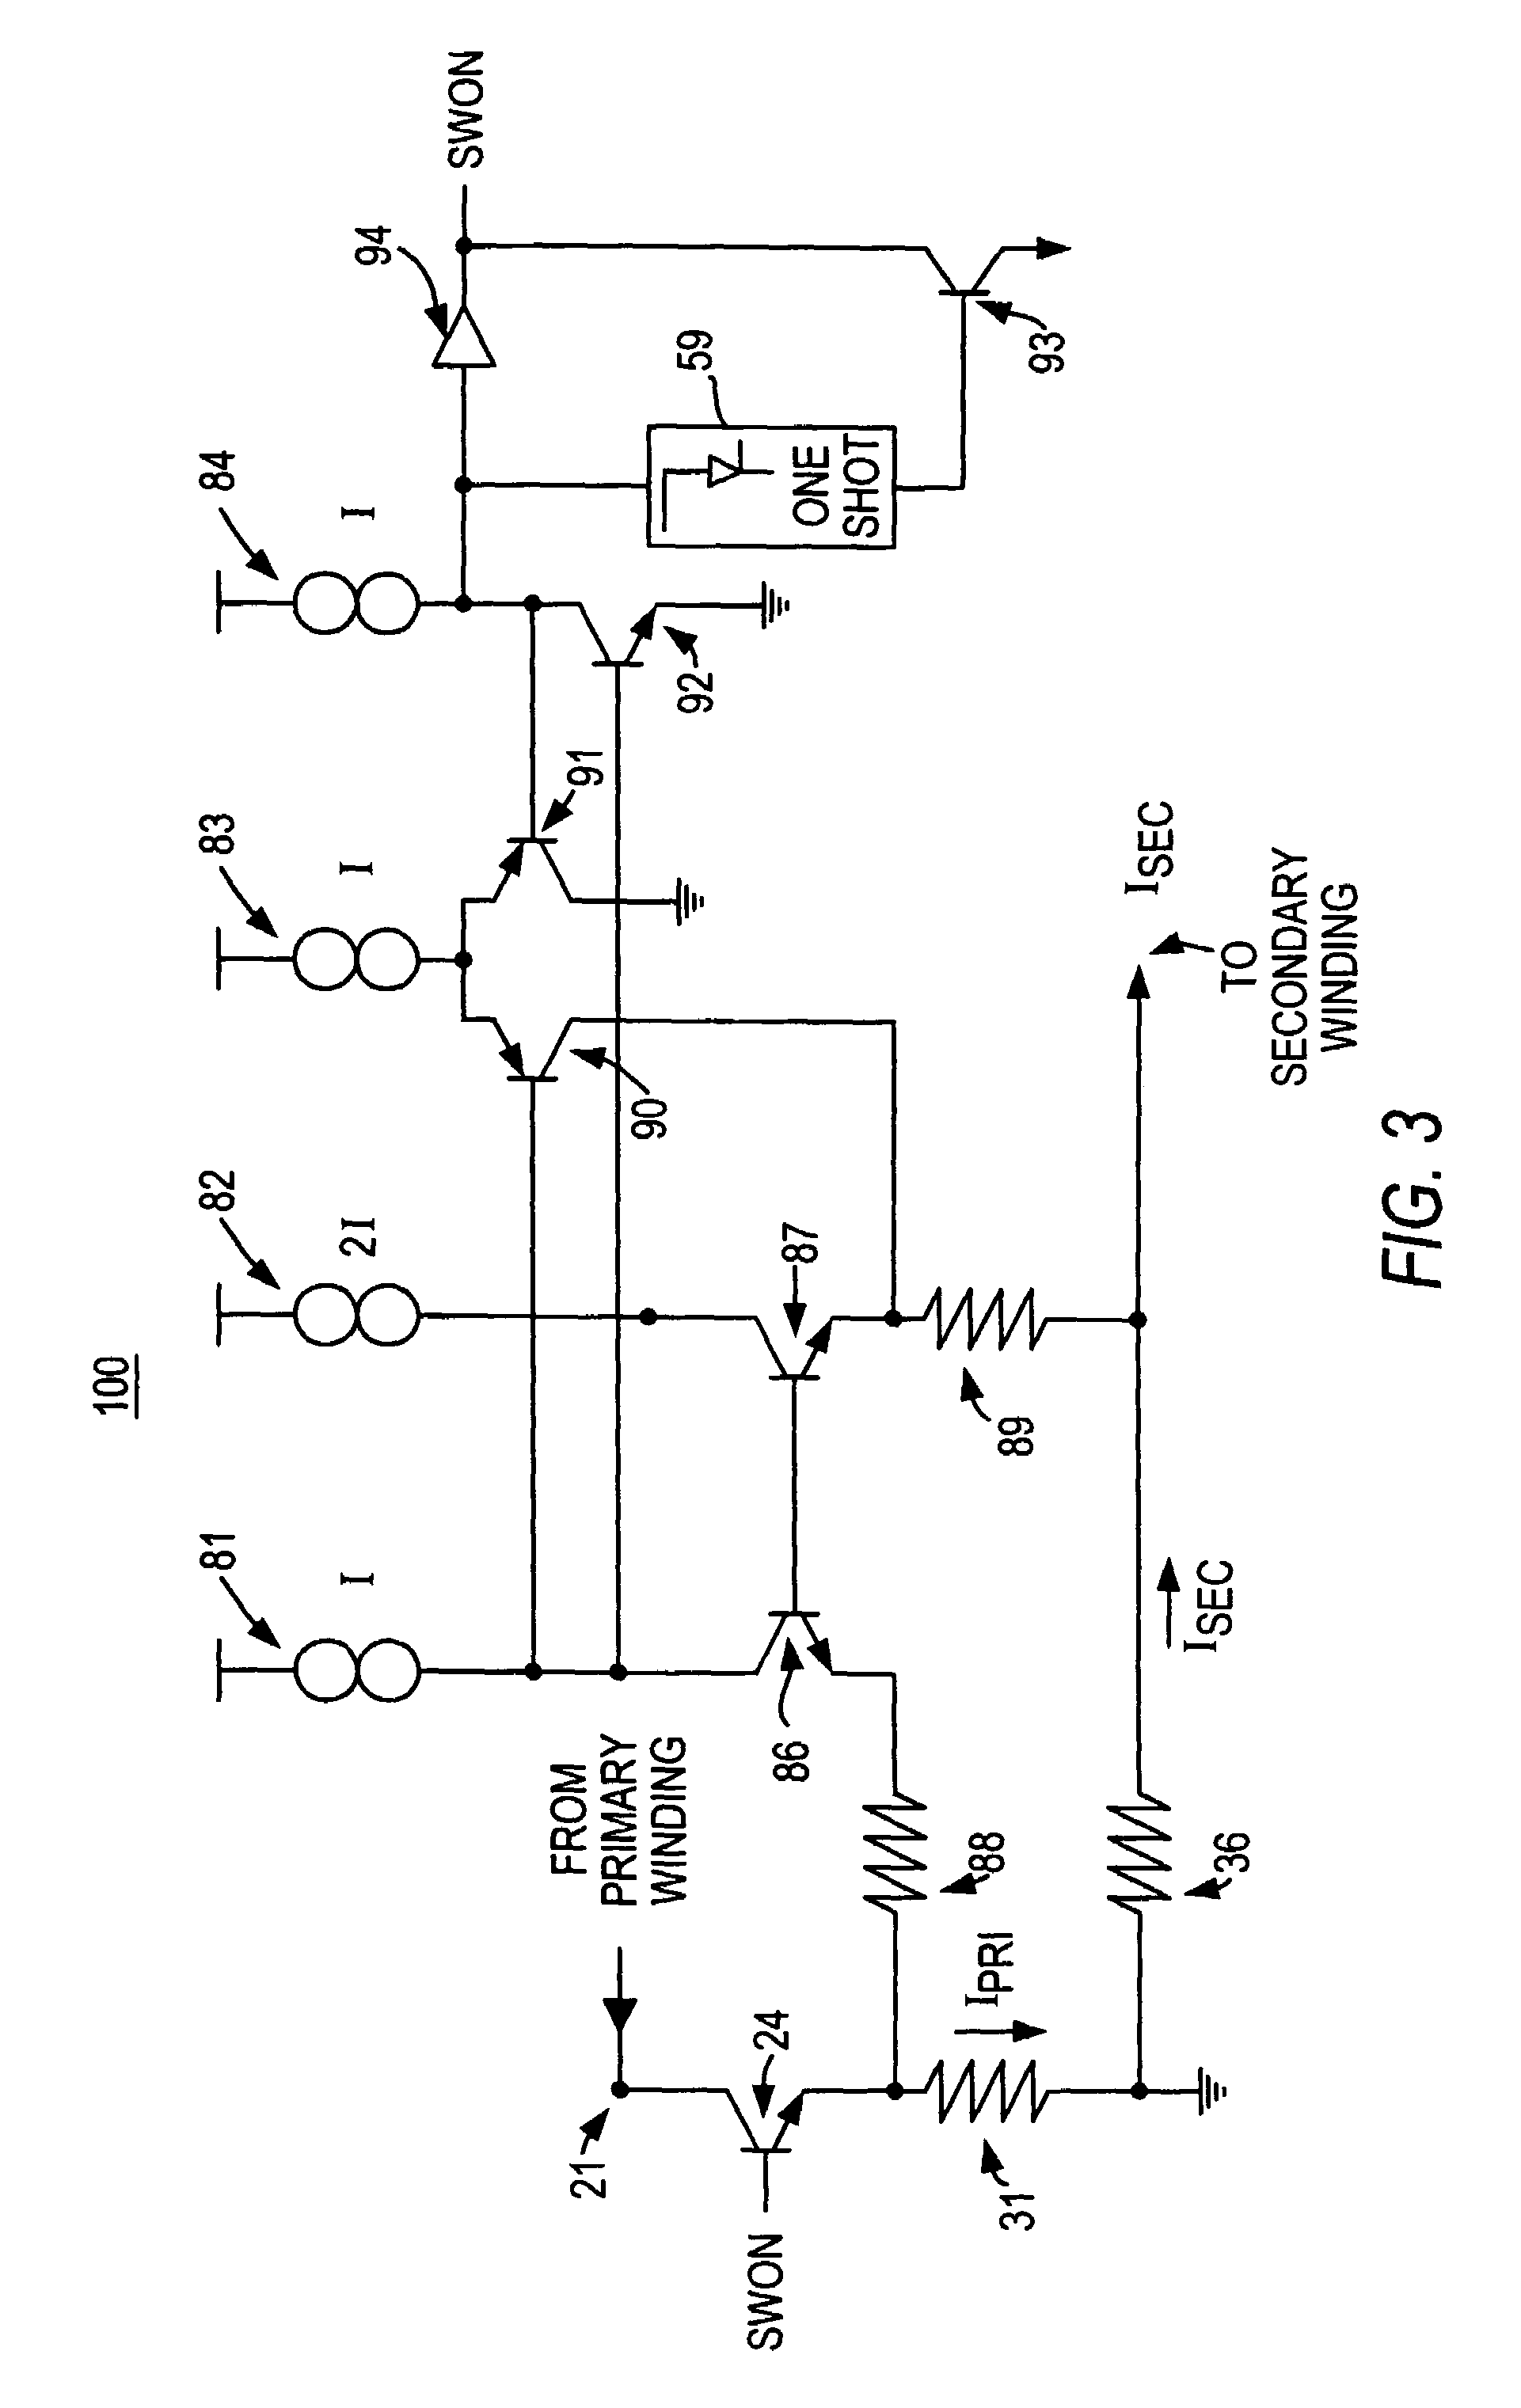 Capacitor charging circuitry and methodology implementing controlled on and off time switching